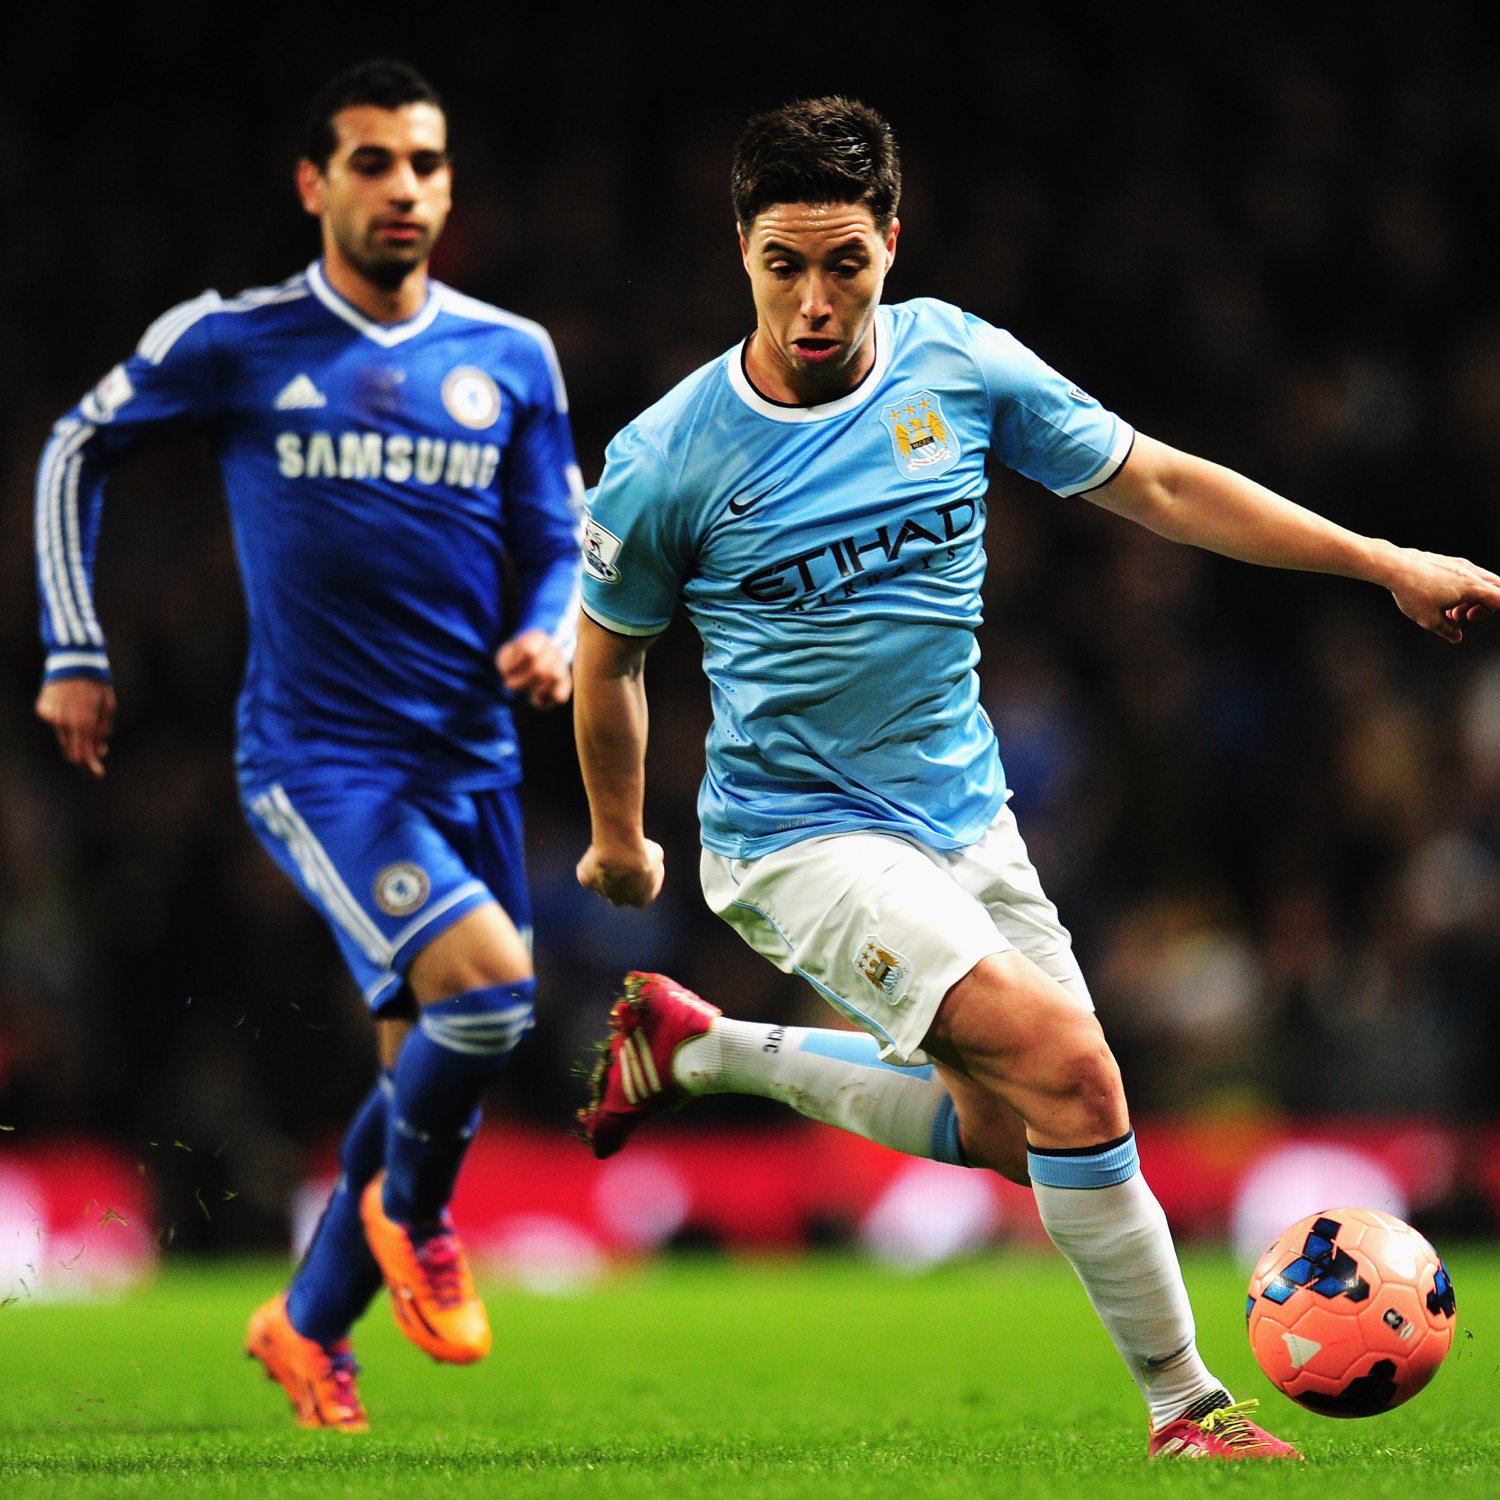 Manchester City vs. Chelsea Video Highlights from FA Cup 6th Round